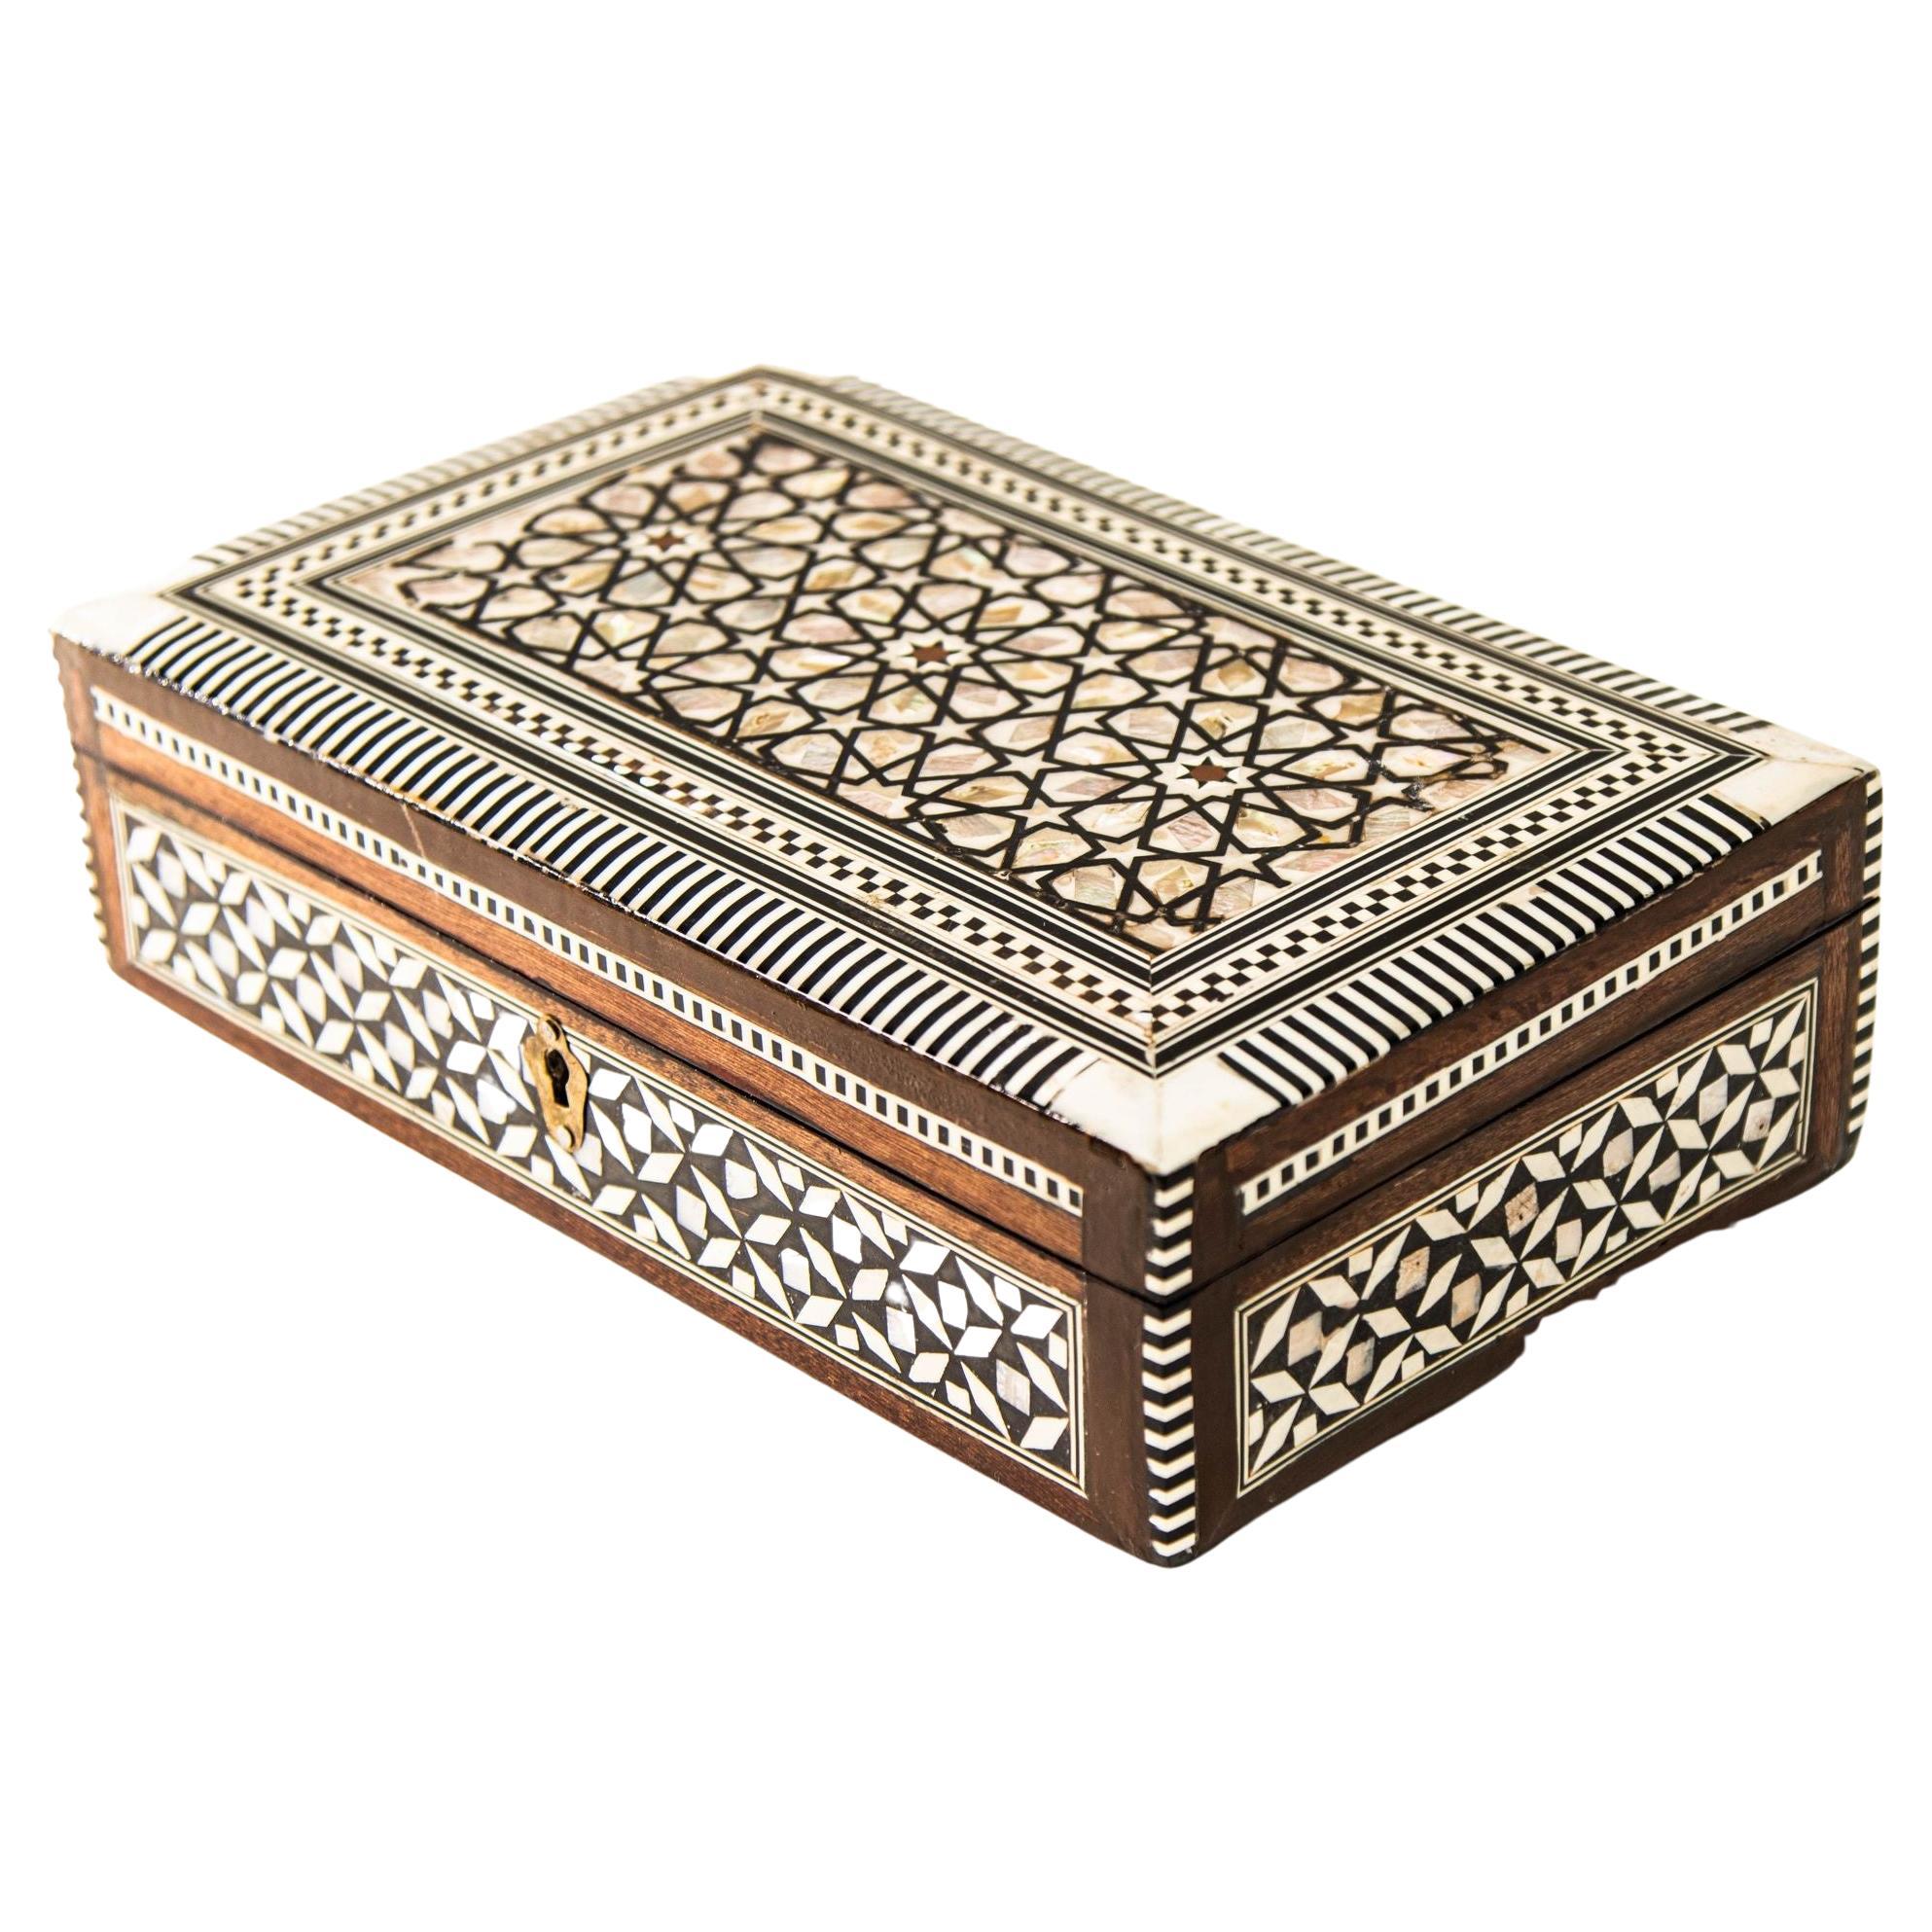 1950s Mosaic Mother of Pearl Inlaid Decorative Middle Eastern Islamic Box